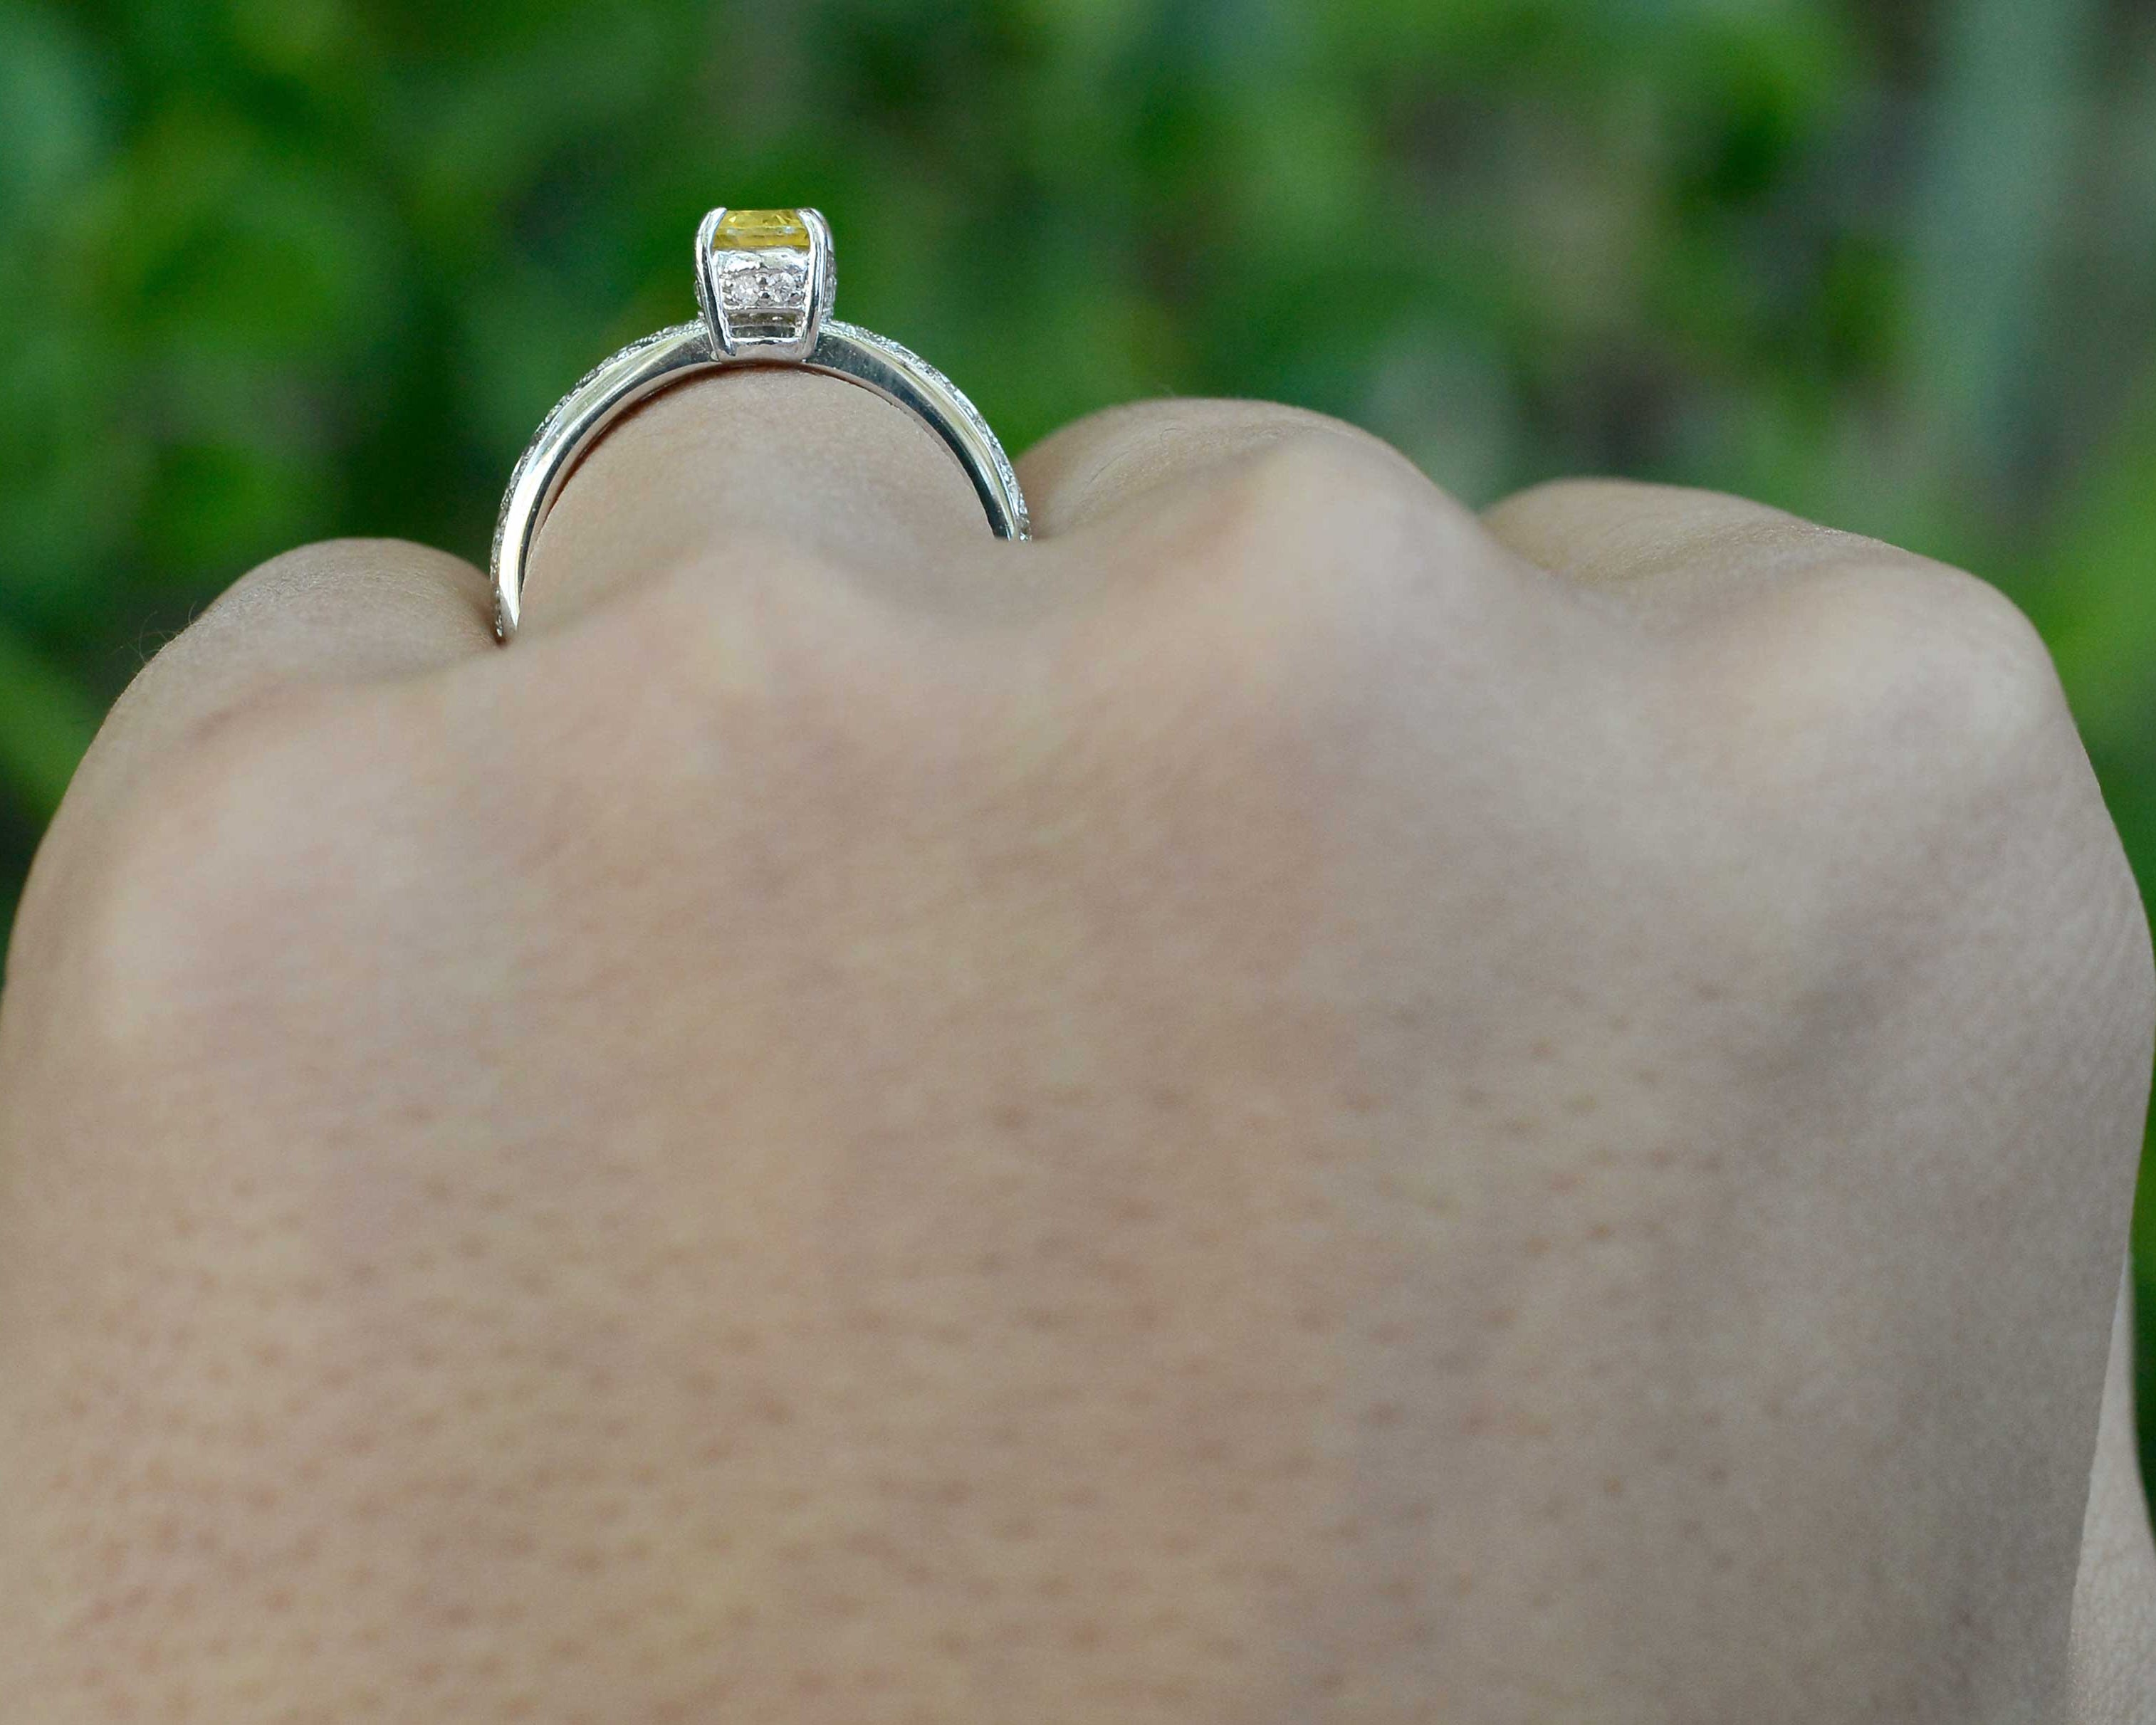 Yellow sapphire 18k white gold engagement ring with a crown setting.